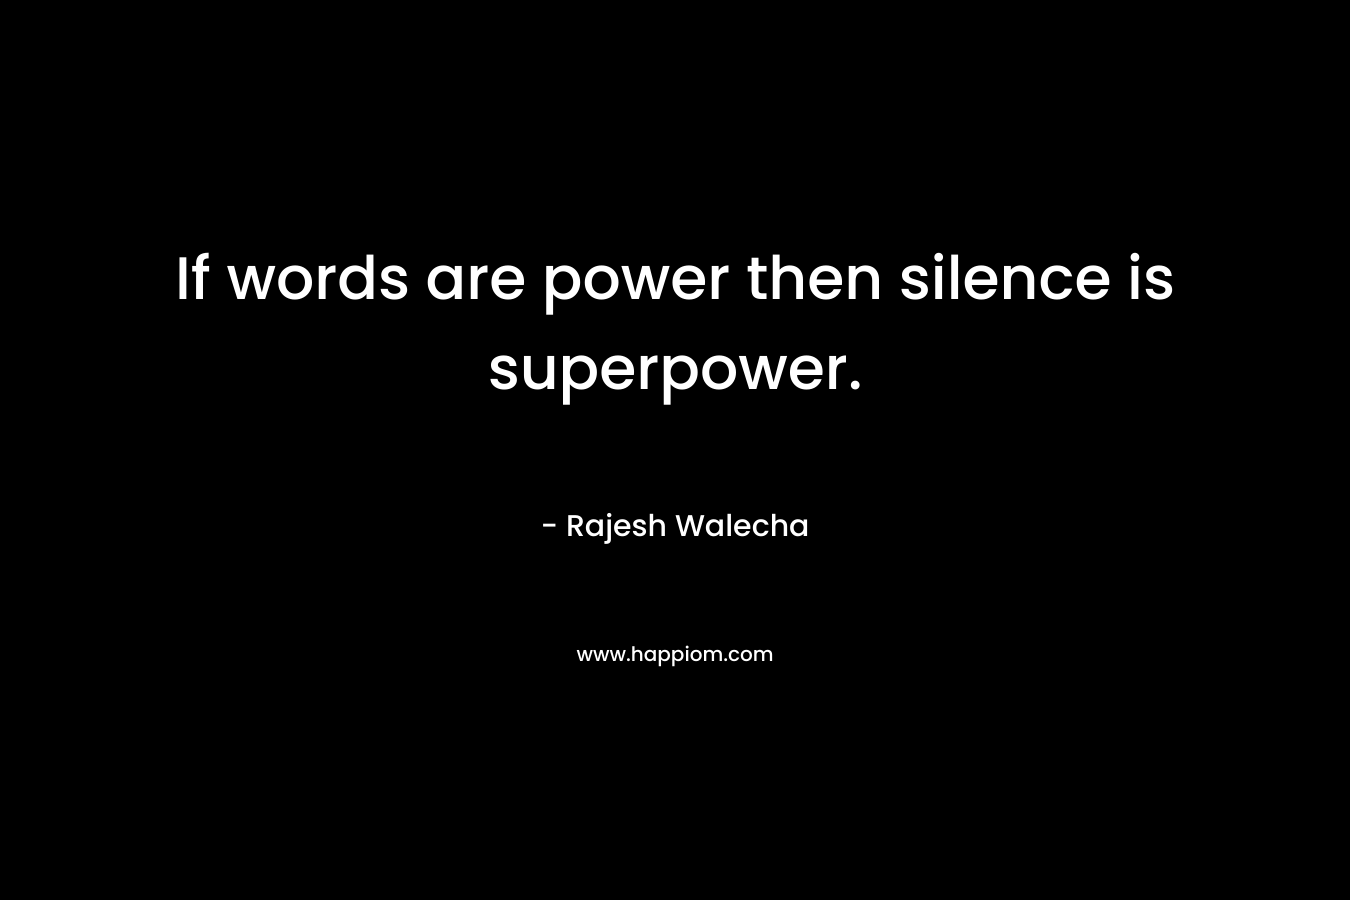 If words are power then silence is superpower. – Rajesh Walecha